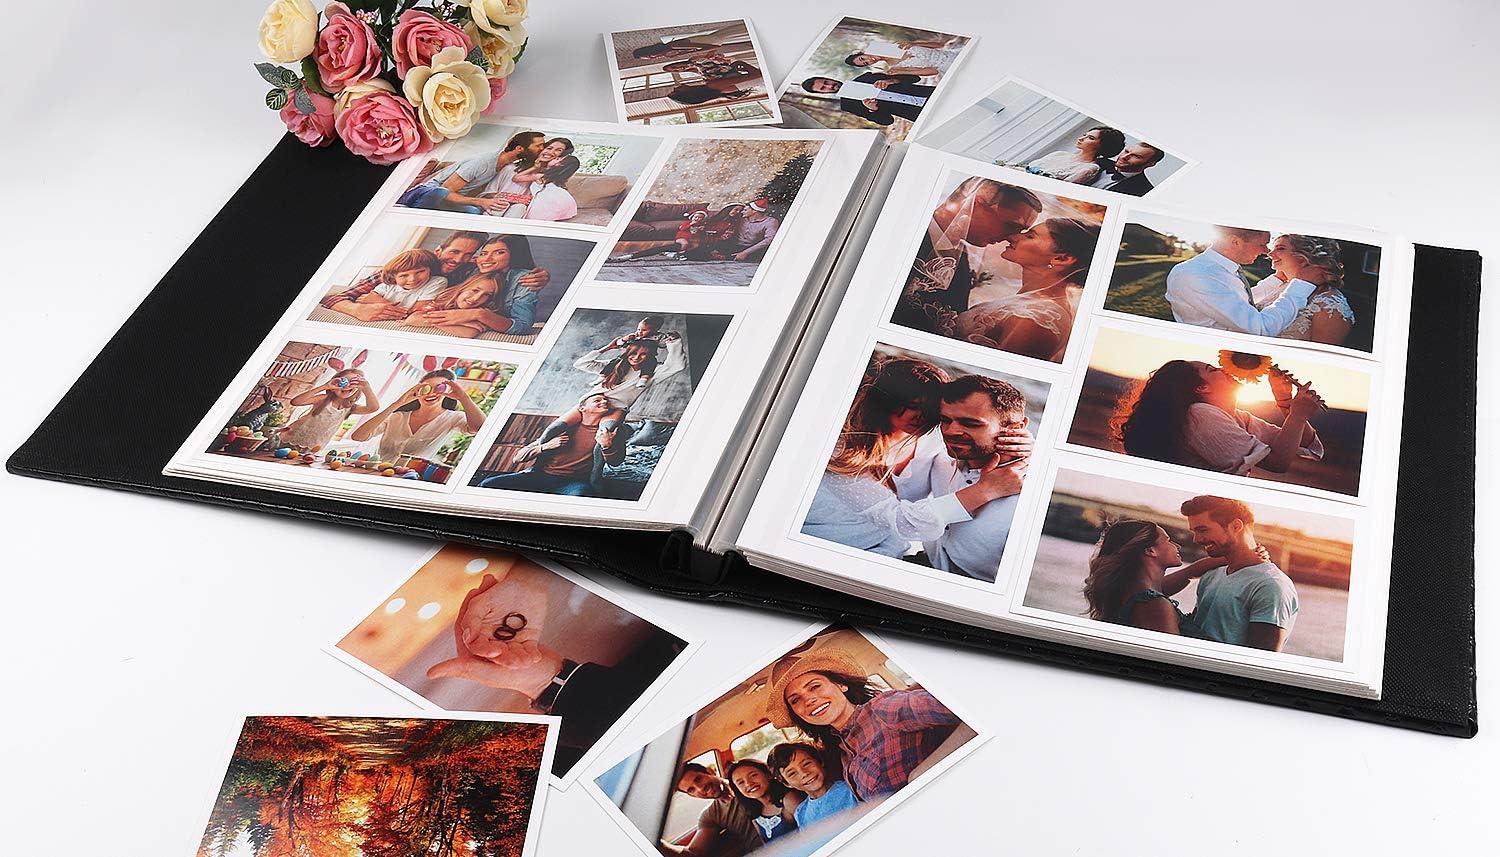 RECUTMS Picture Albums 4x6 for 600 Photos Black Pages 5 Per Page